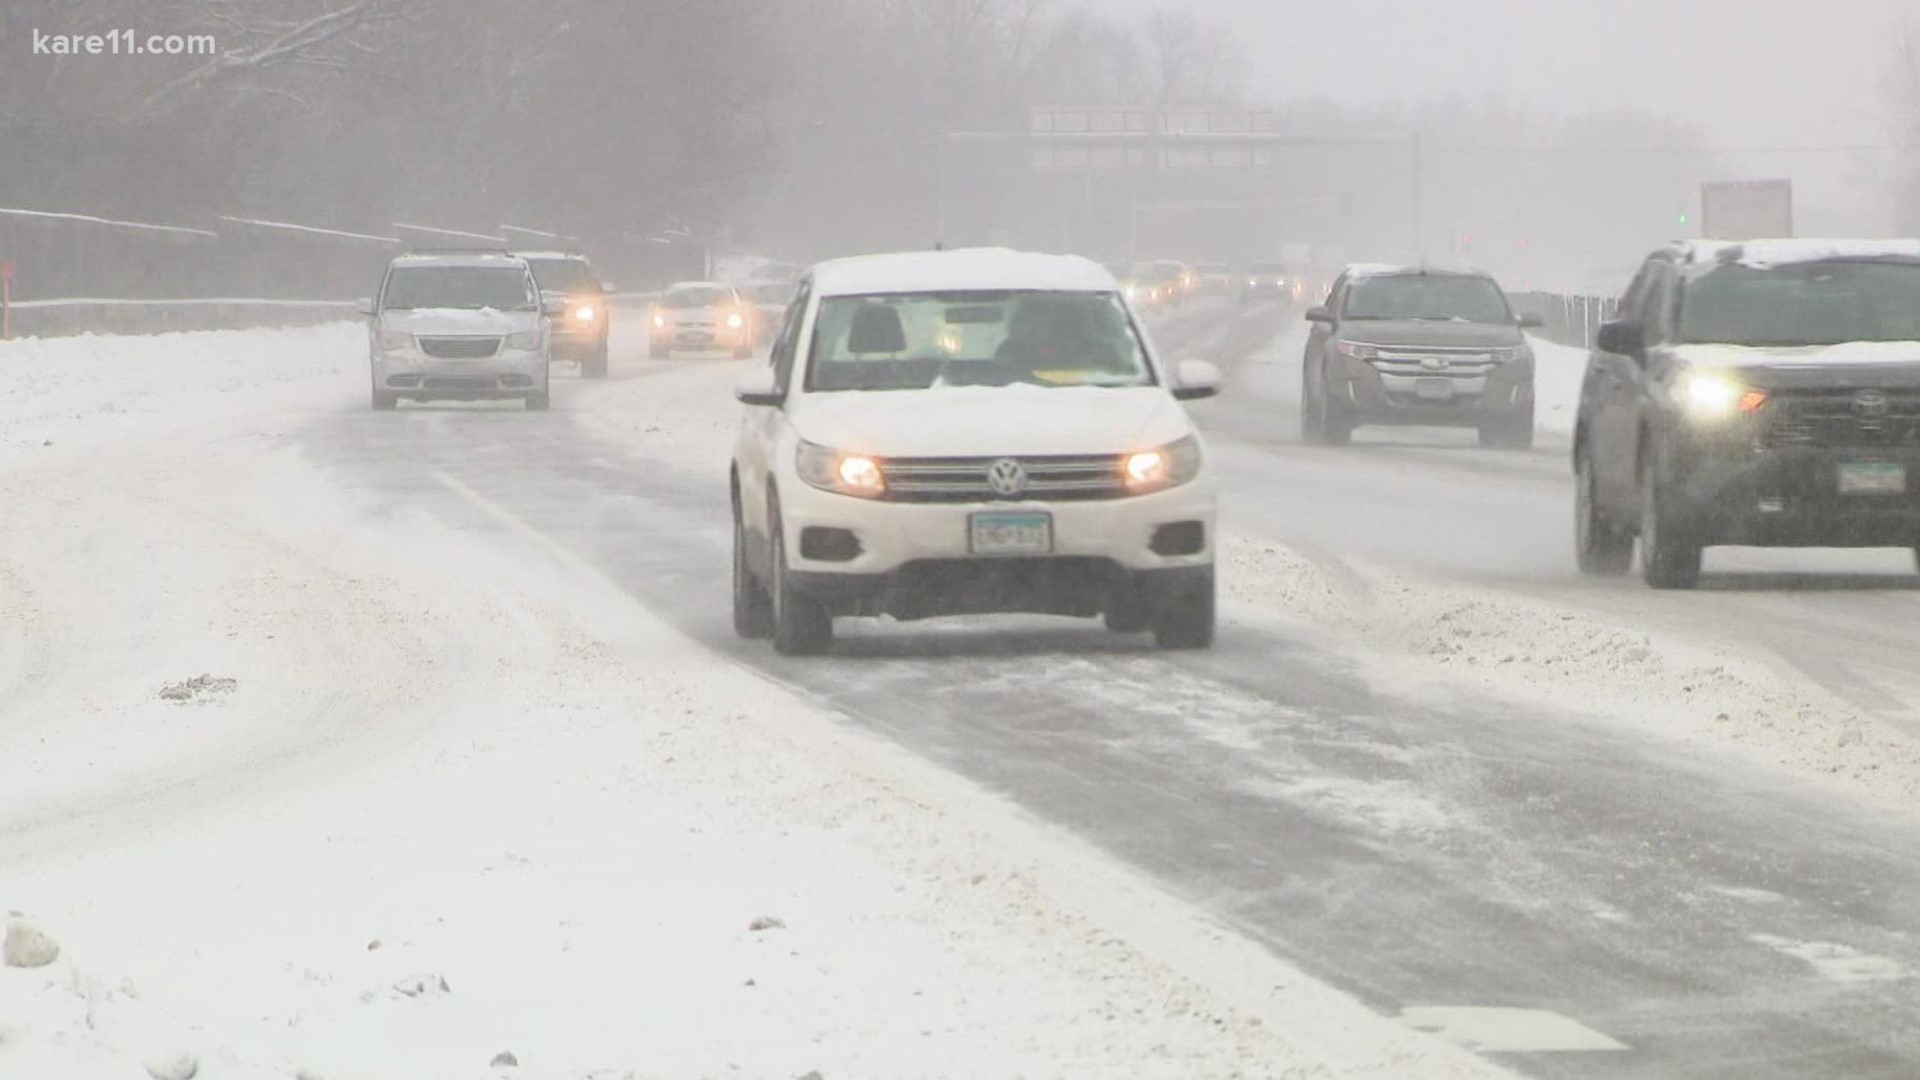 Minnesotans rely on salted roads to keep their winter commutes safe. But too much salt in our water is a bad thing, so the state is testing alternatives.